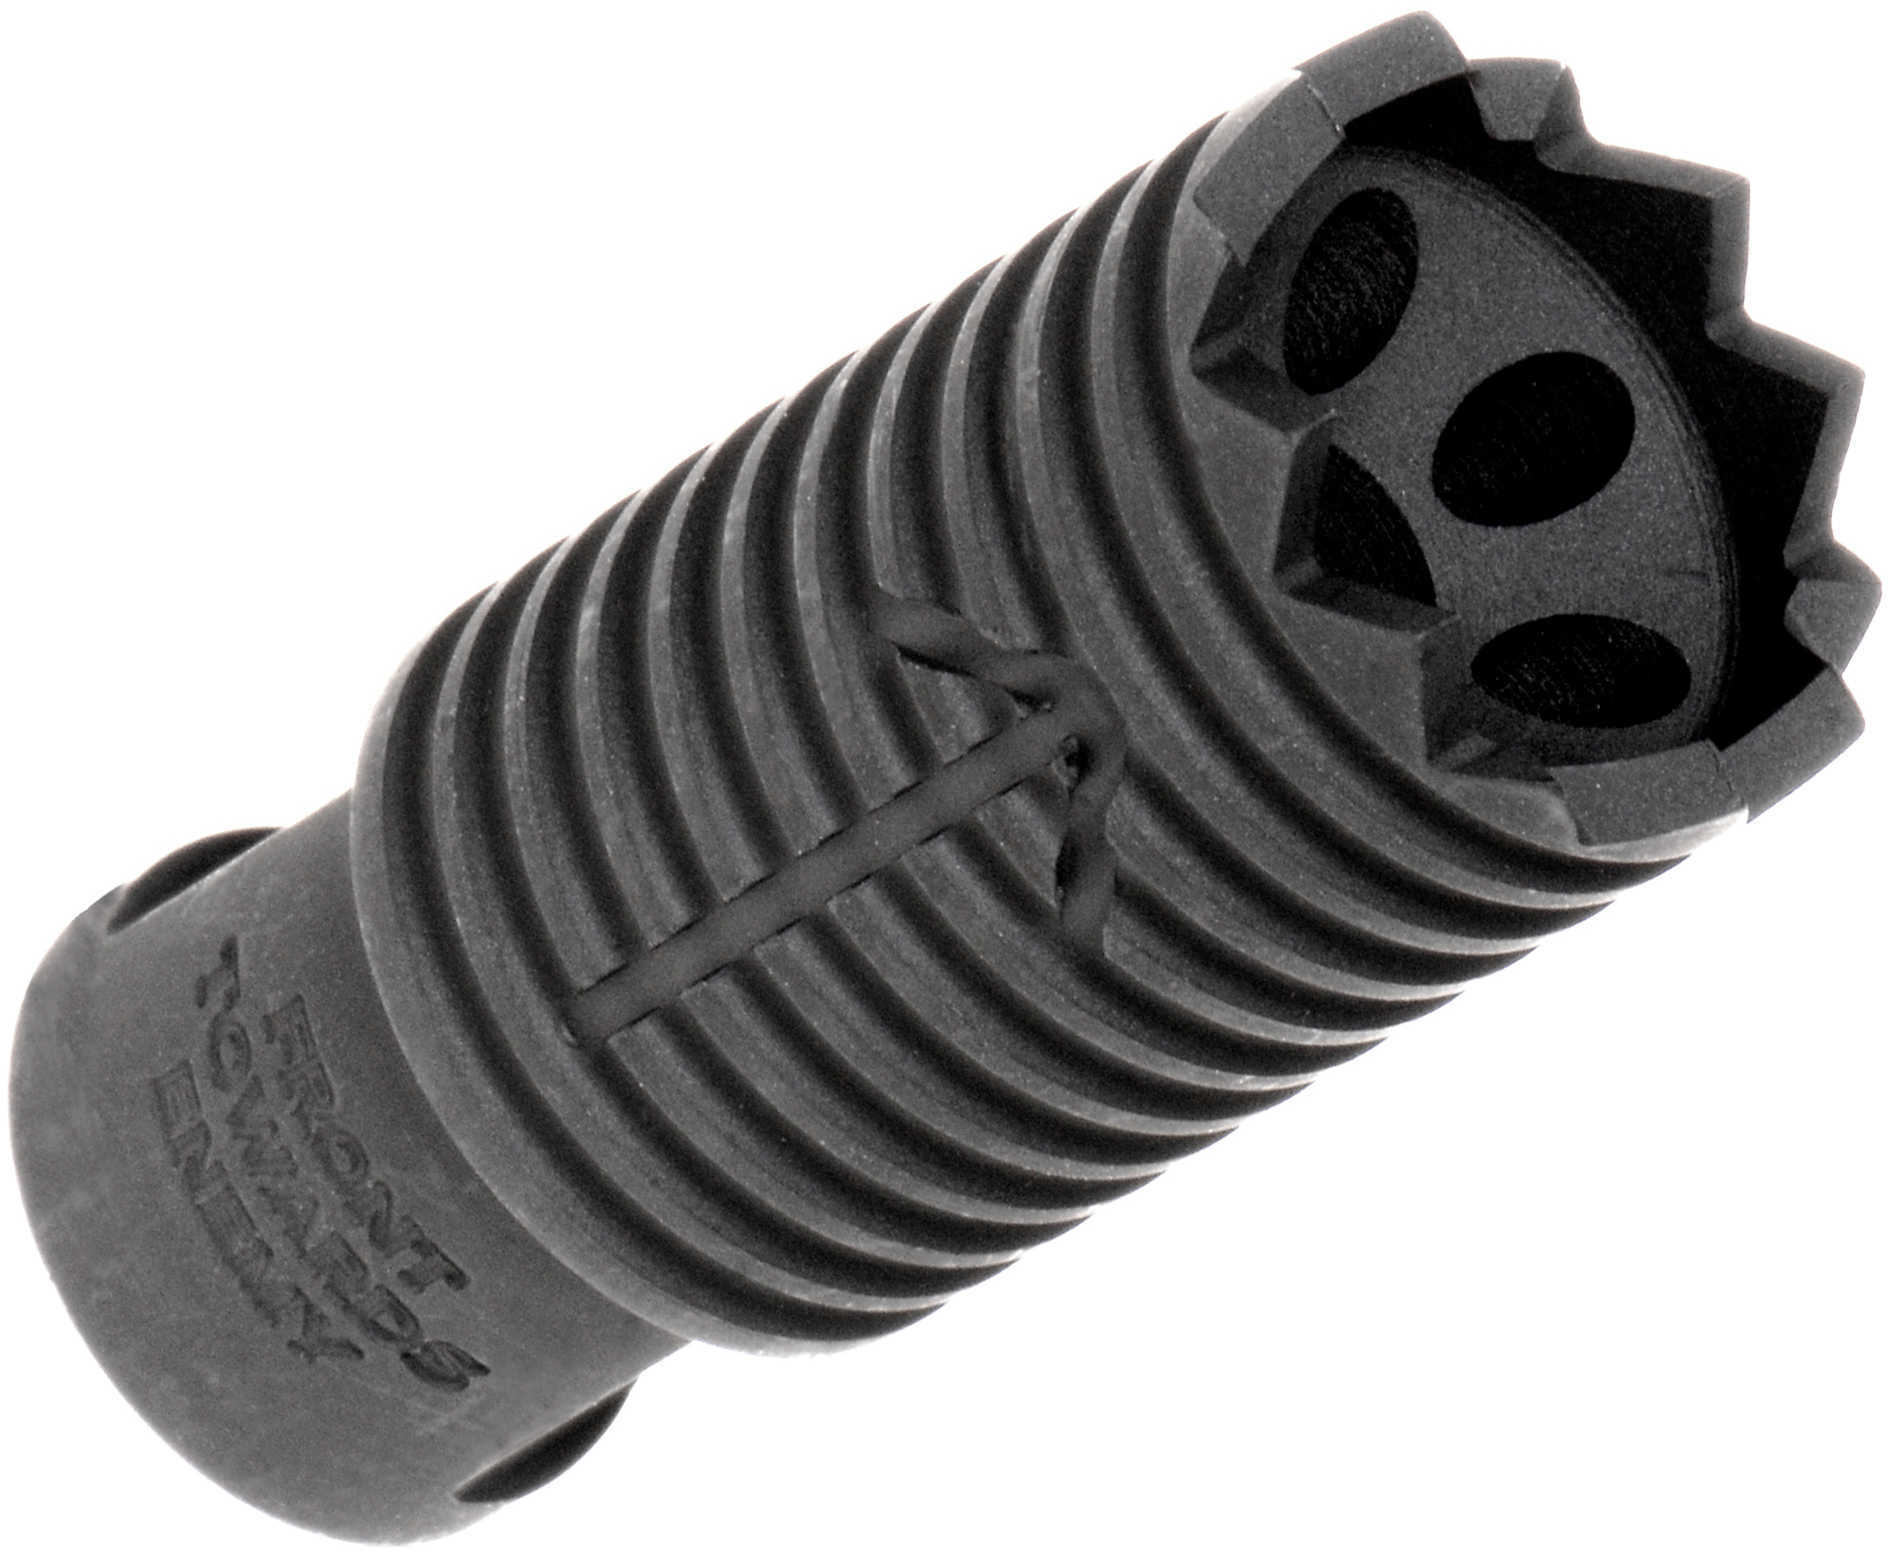 Troy Claymore Muzzle Brake Not Compatible With Any M-14/M1A Rifles Black 7.62 Nato/.308/6.8 (5/8 X24 TPI) SBRA-CLM-06BT-